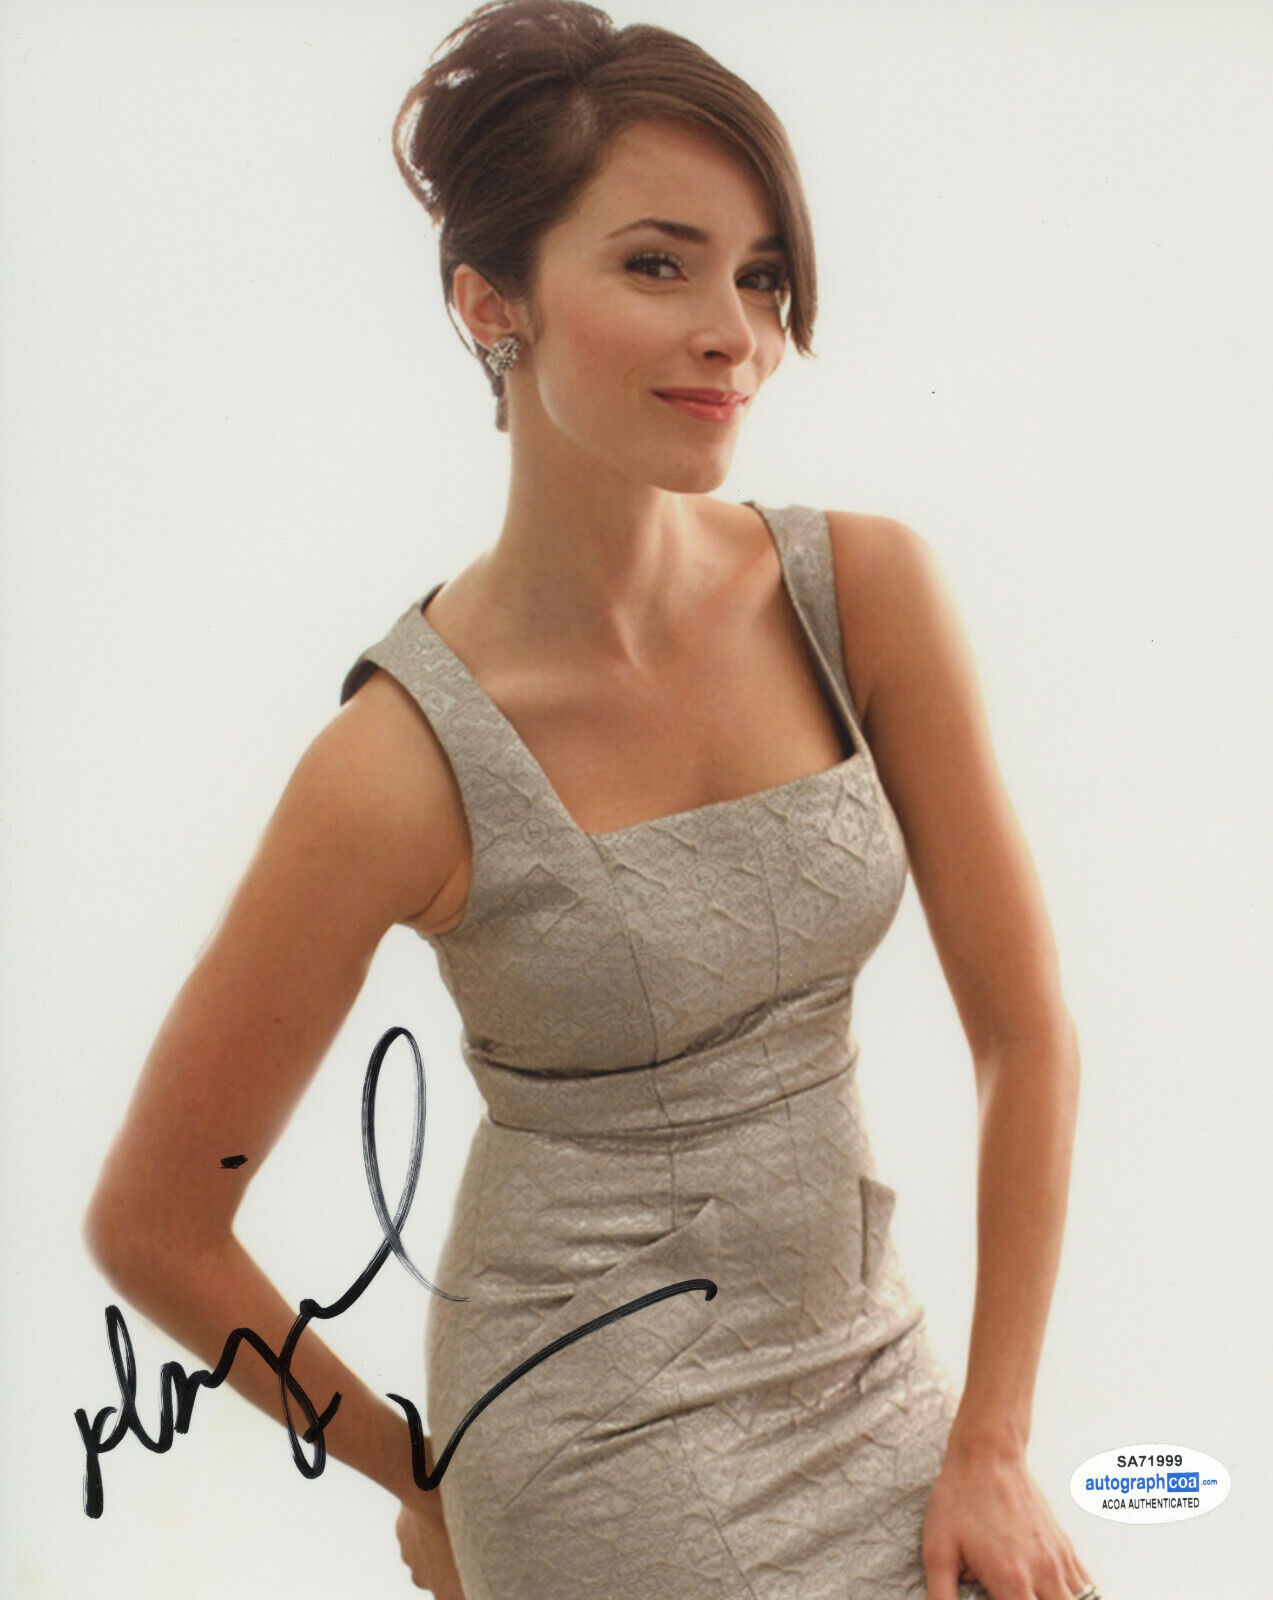 SEXY ABIGAIL SPENCER SIGNED 8x10 Photo Poster painting #2 REBEL TIMELESS ACOA COA EXACT PROOF!